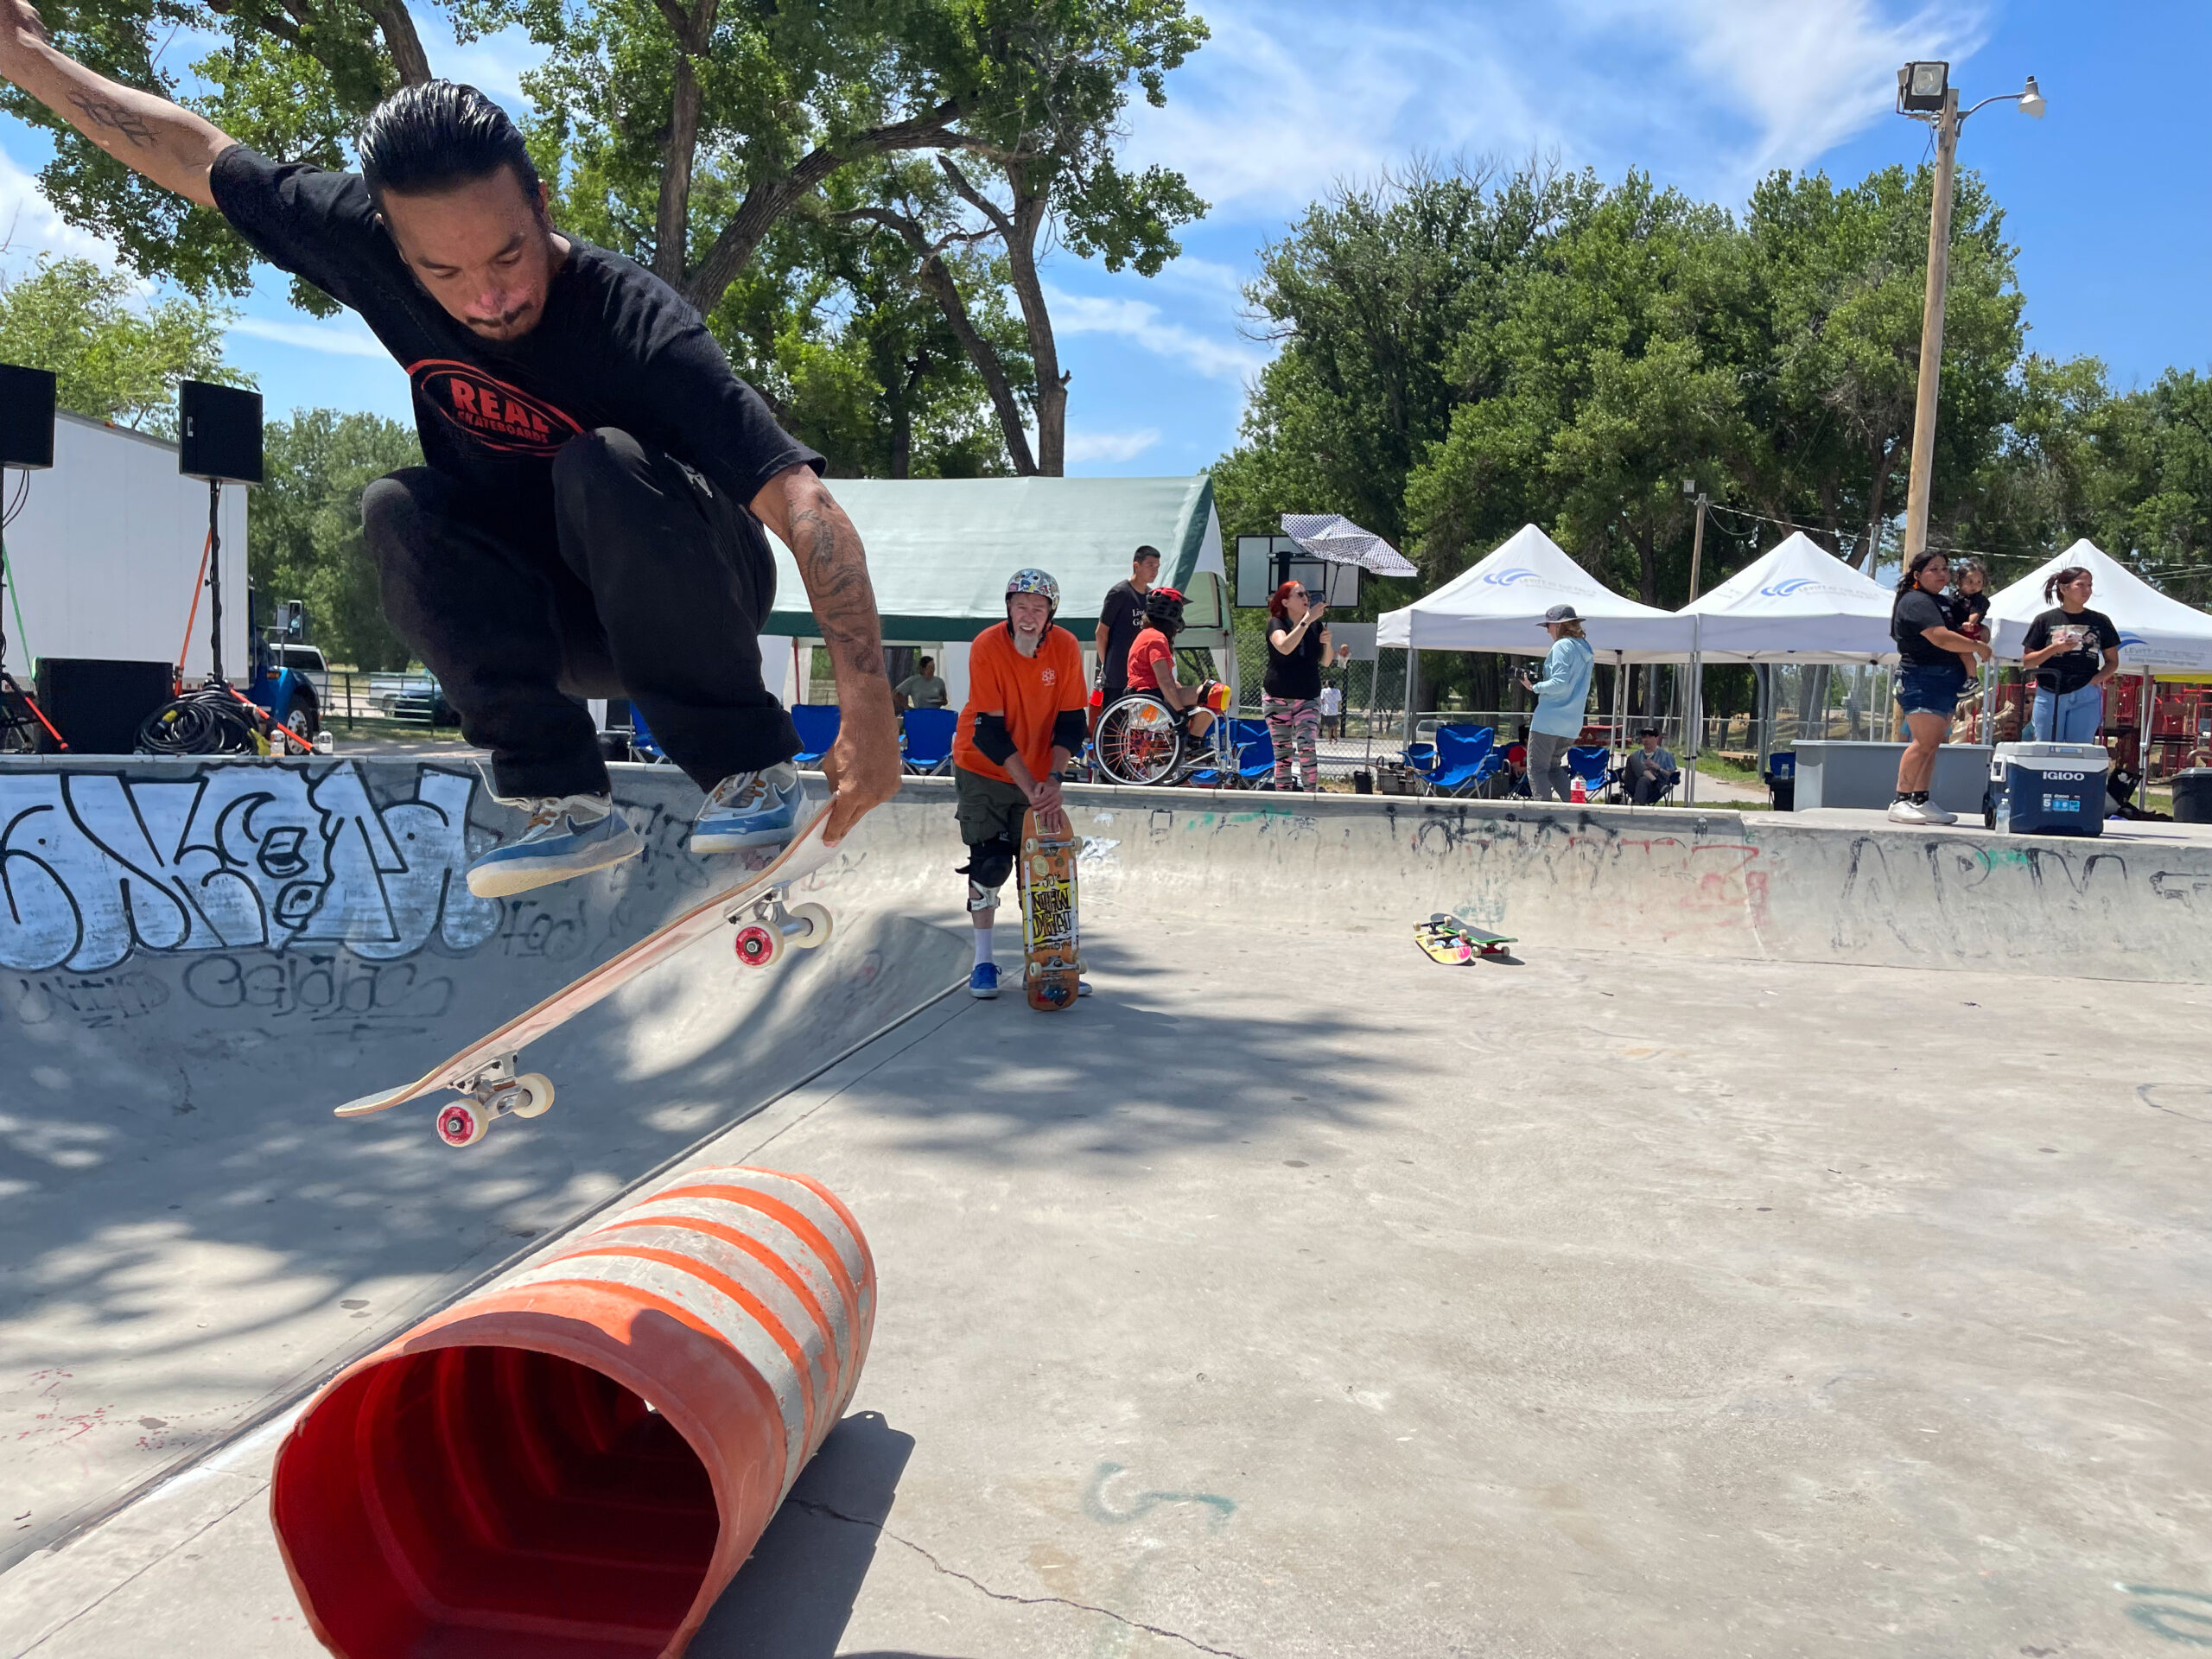 An adult skateboarder jumps over an orange construction cone on its side at a cement skatepark in the Pine Ridge Reservation, home of the Oglala Sioux Tribe in southwest South Dakota.